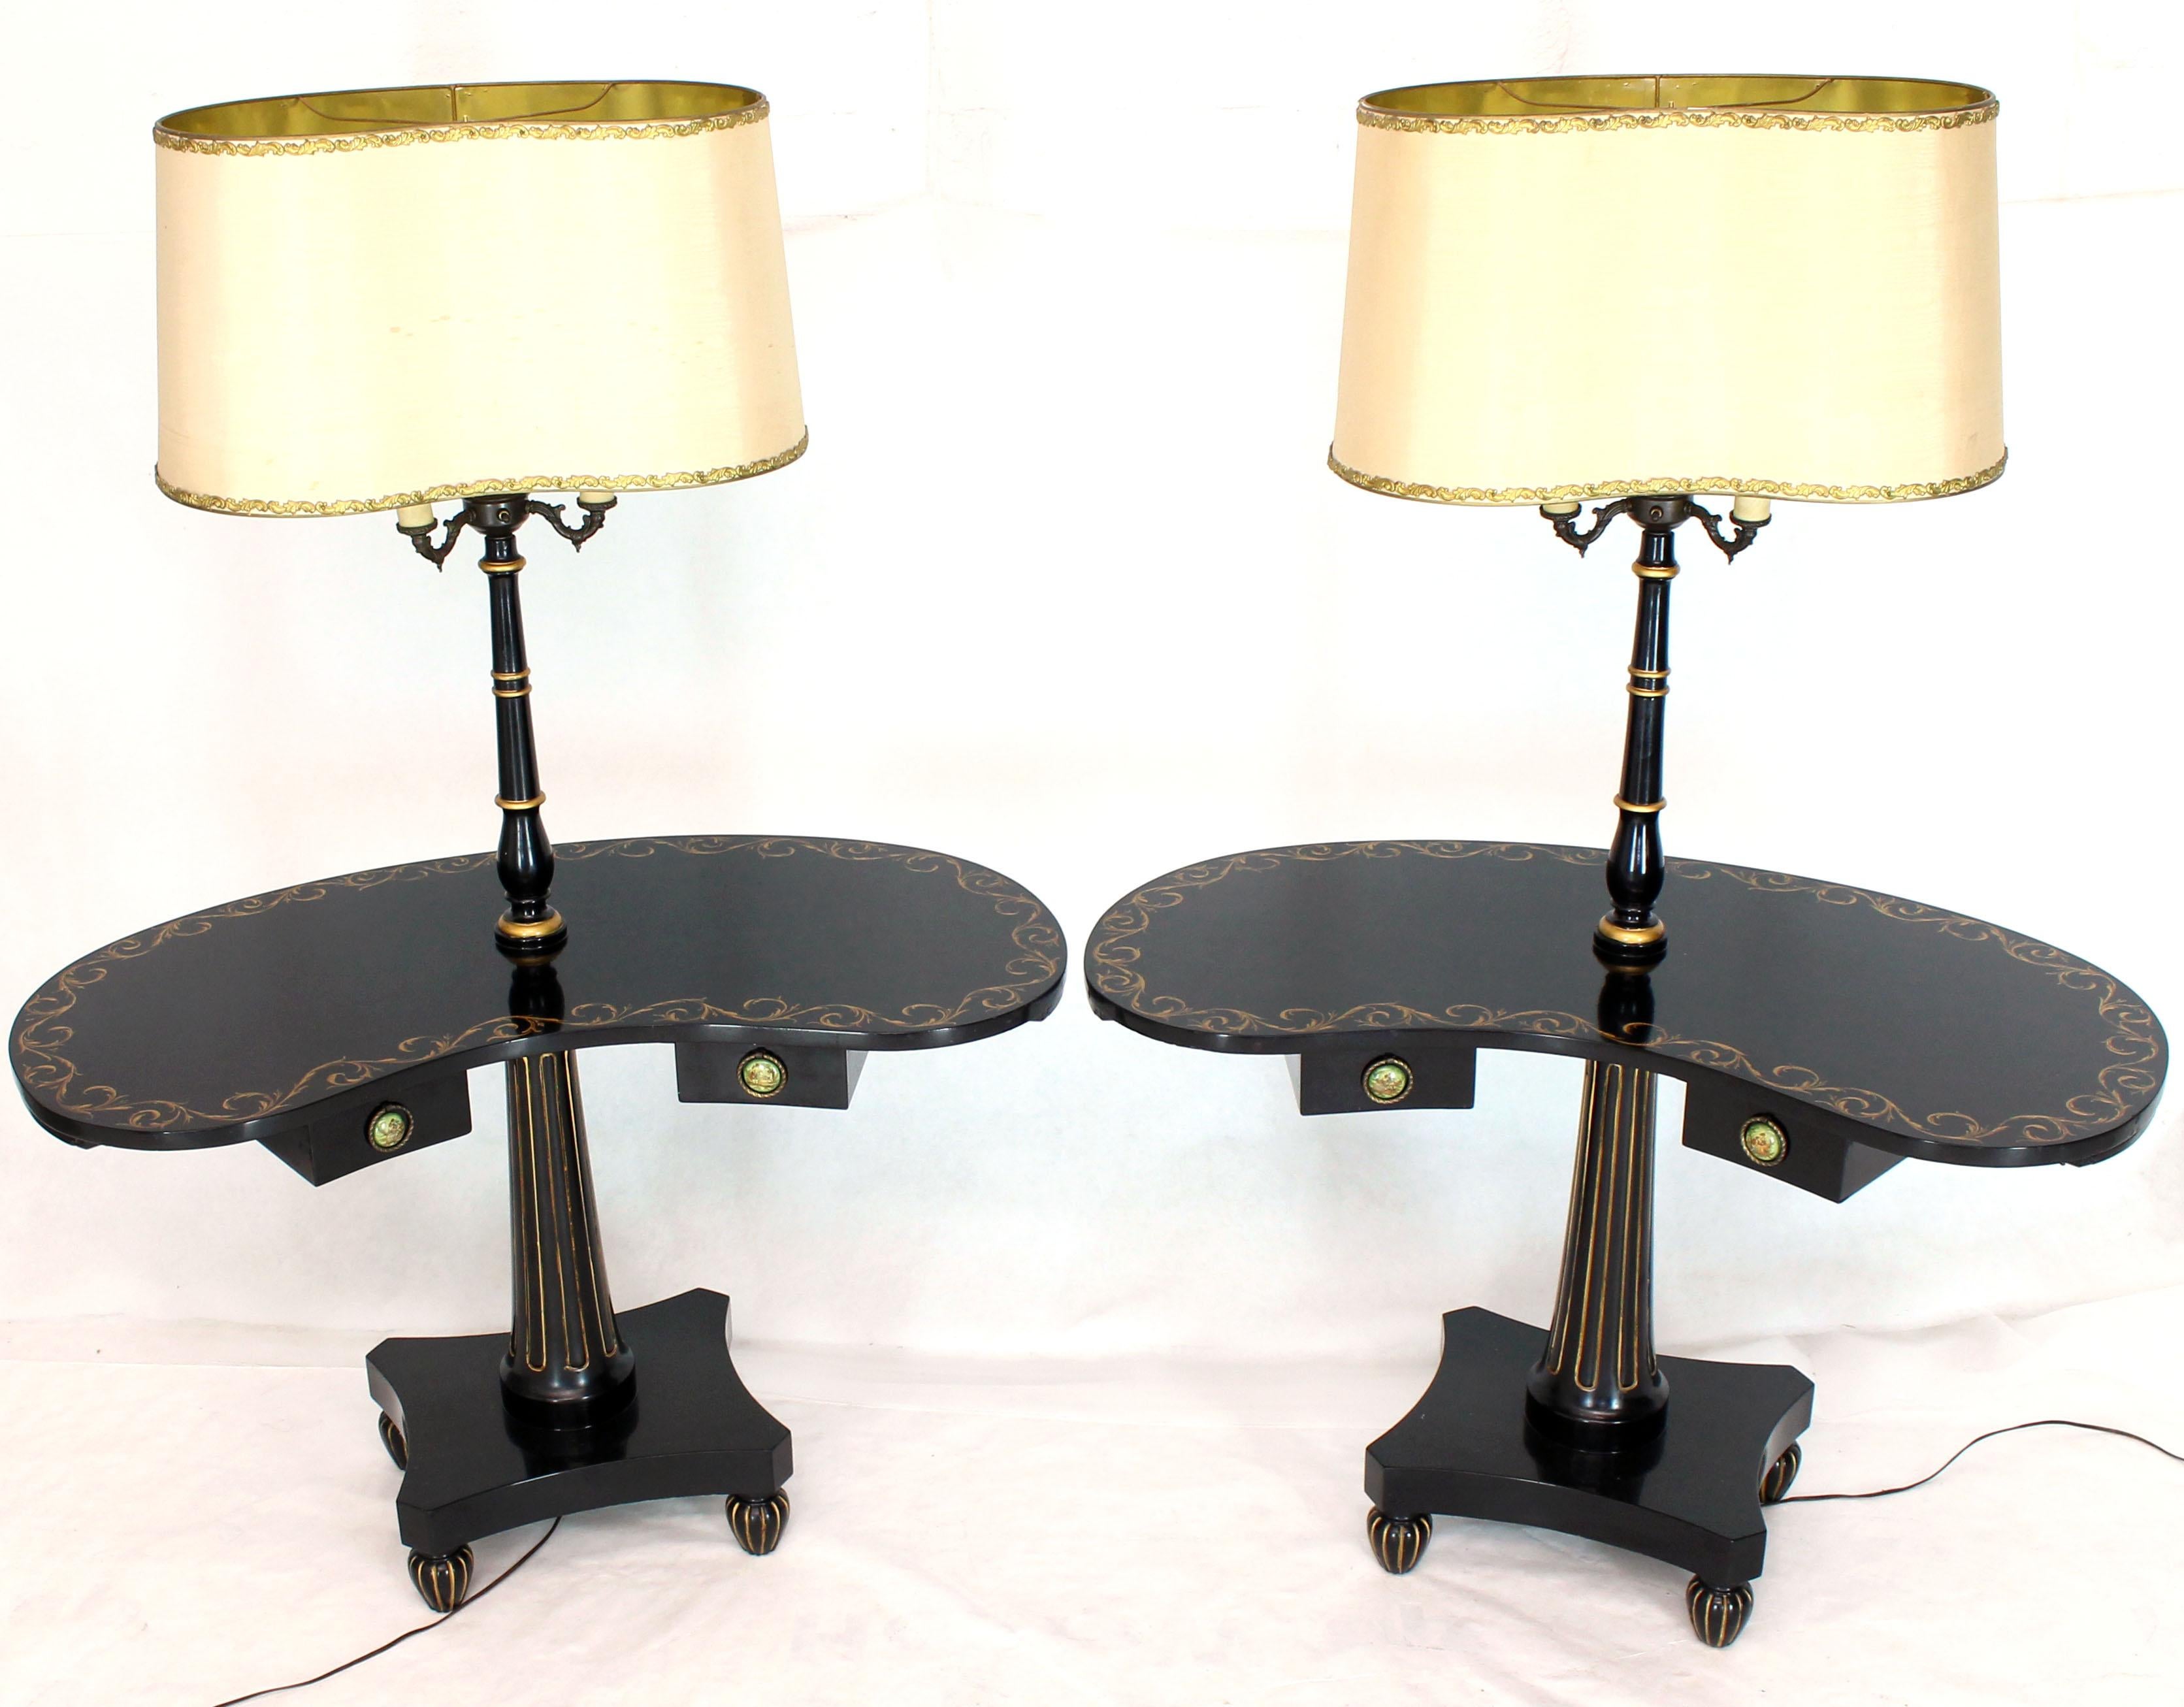 Pair of Black Lacquer Gold Decorated Kidney Shape Deco Floor Lamps Side Tables For Sale 3